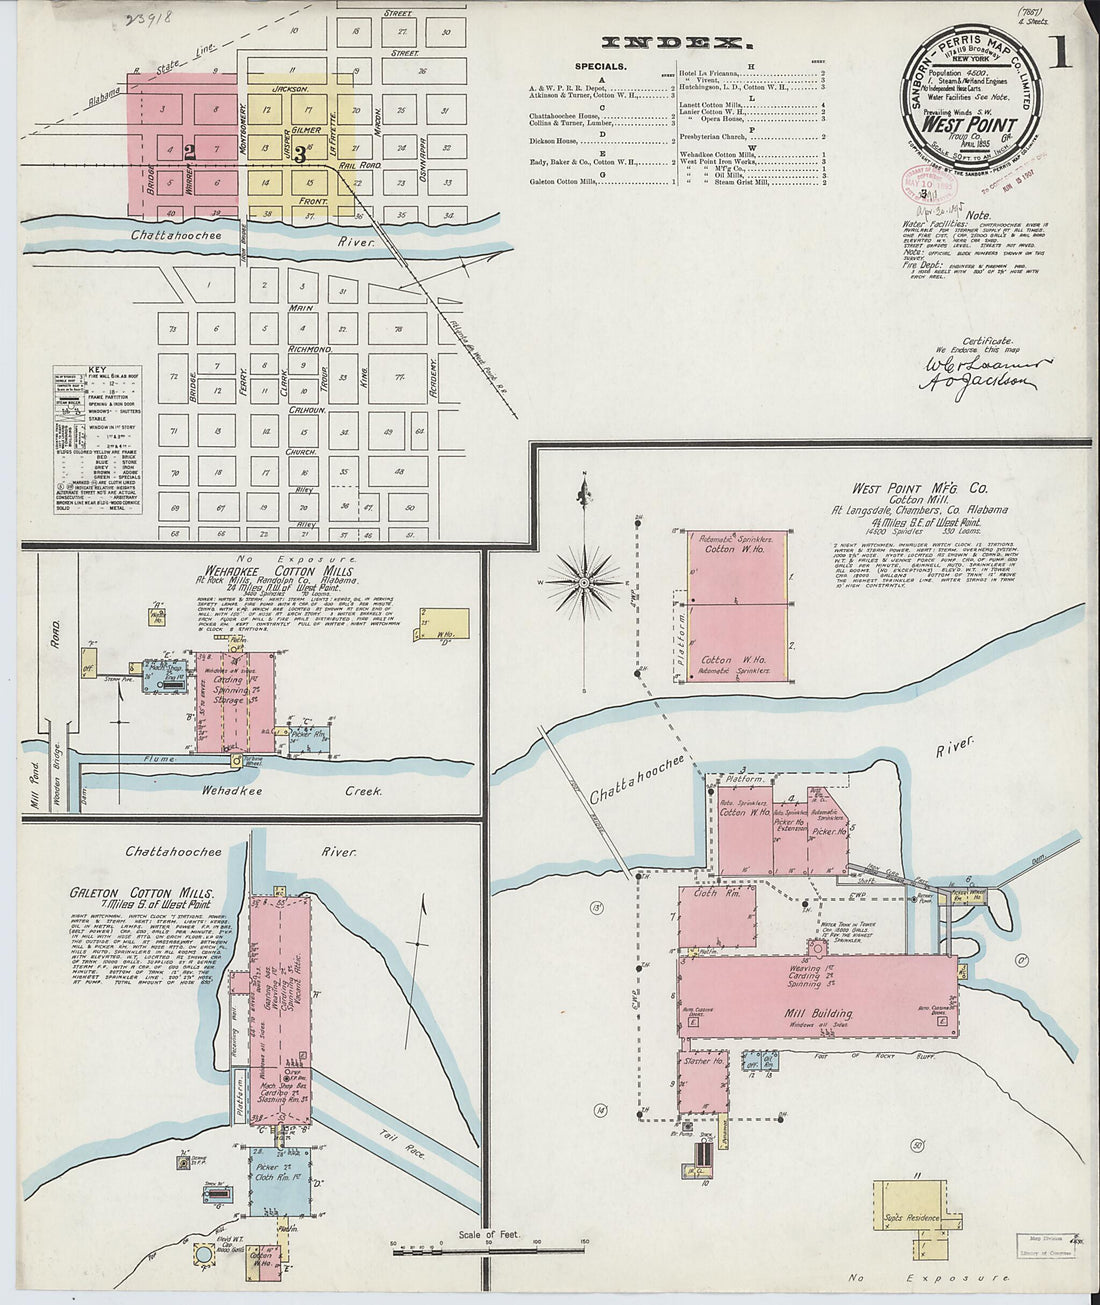 This old map of West Point, Troup County, Georgia was created by Sanborn Map Company in 1895